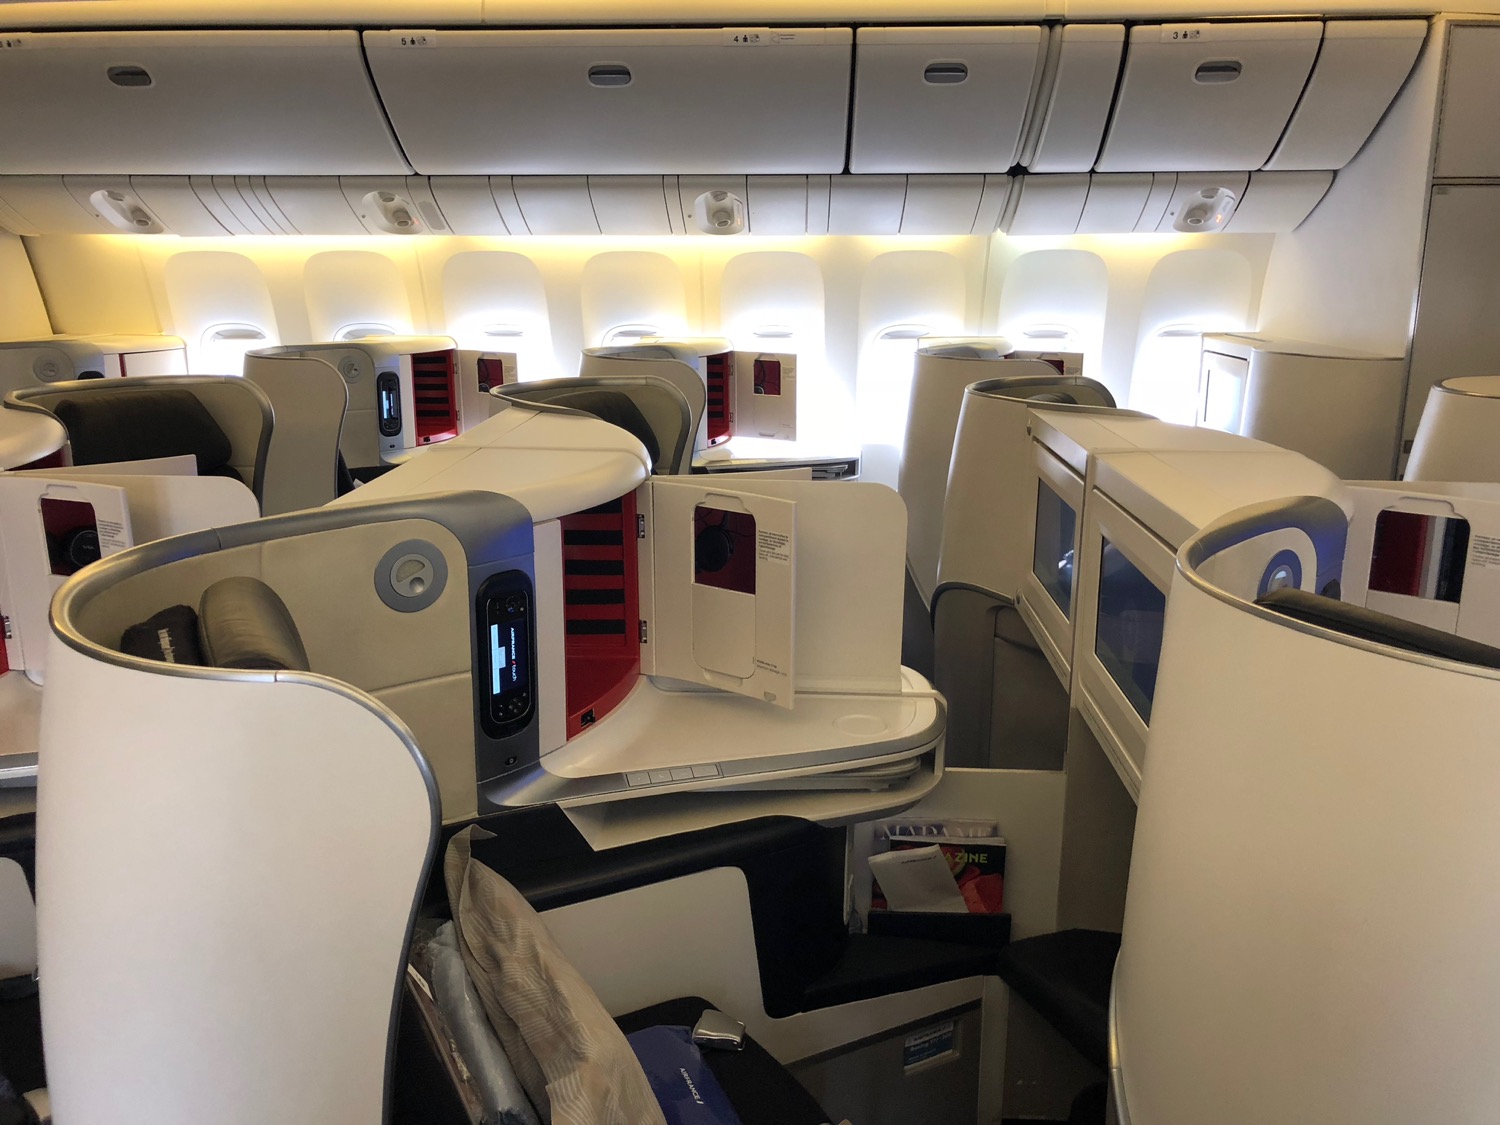 I Loved Flying Air France (777-300 Business Class) - Live and Let's Fly